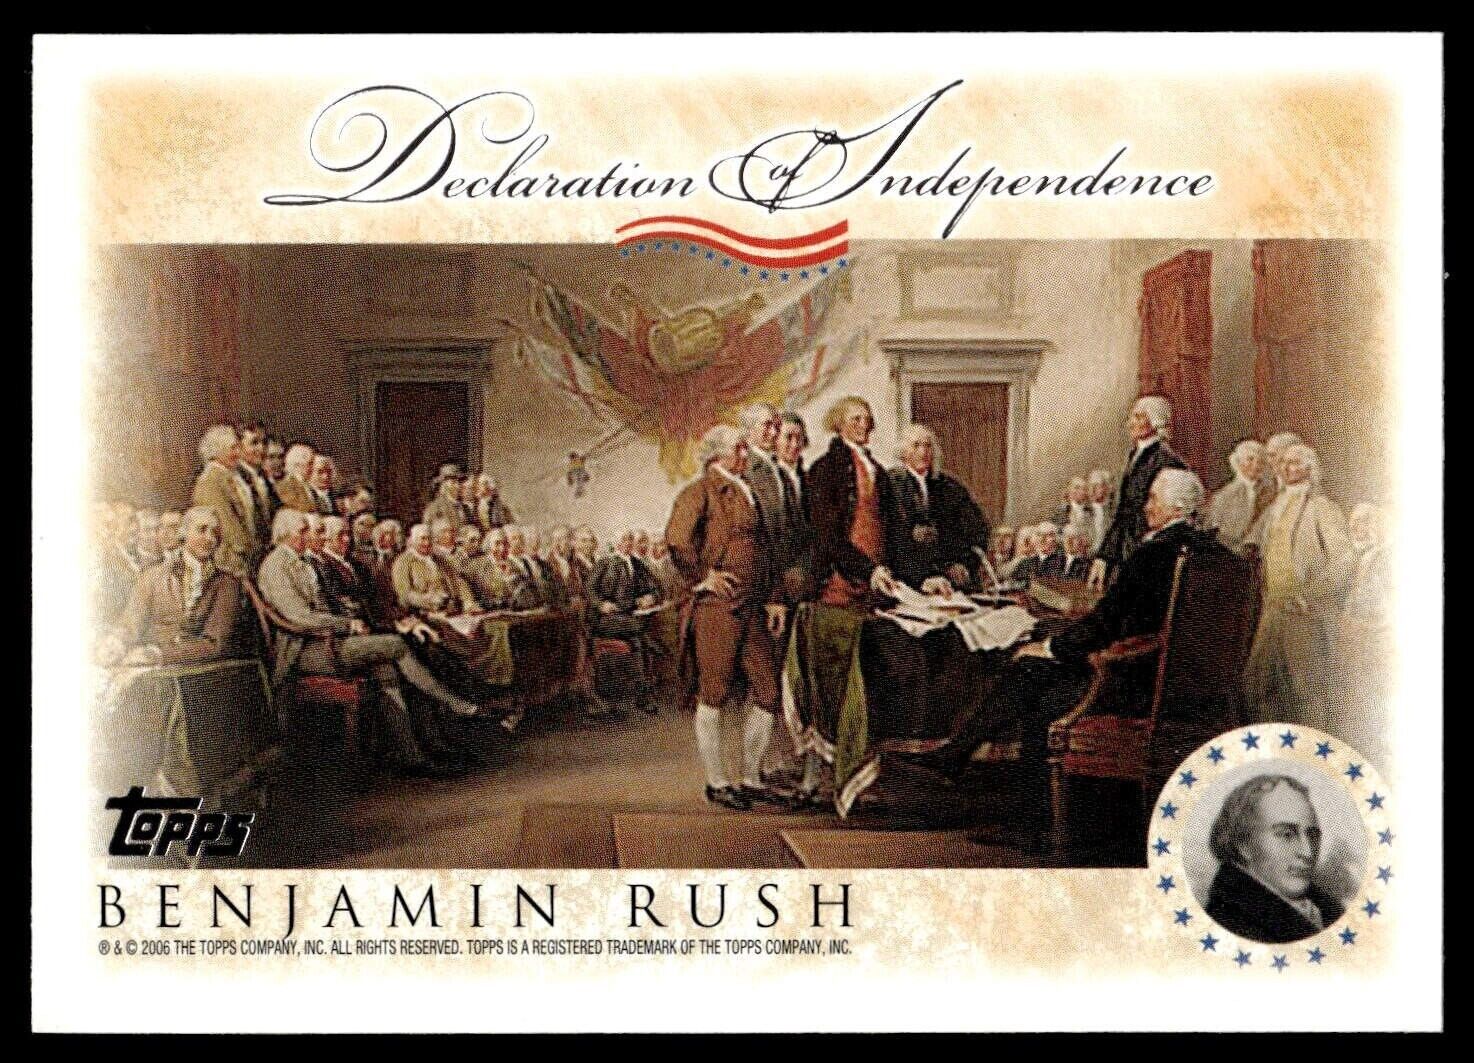 2006 Topps Signers of Declaration of Independence Benjamin Rush